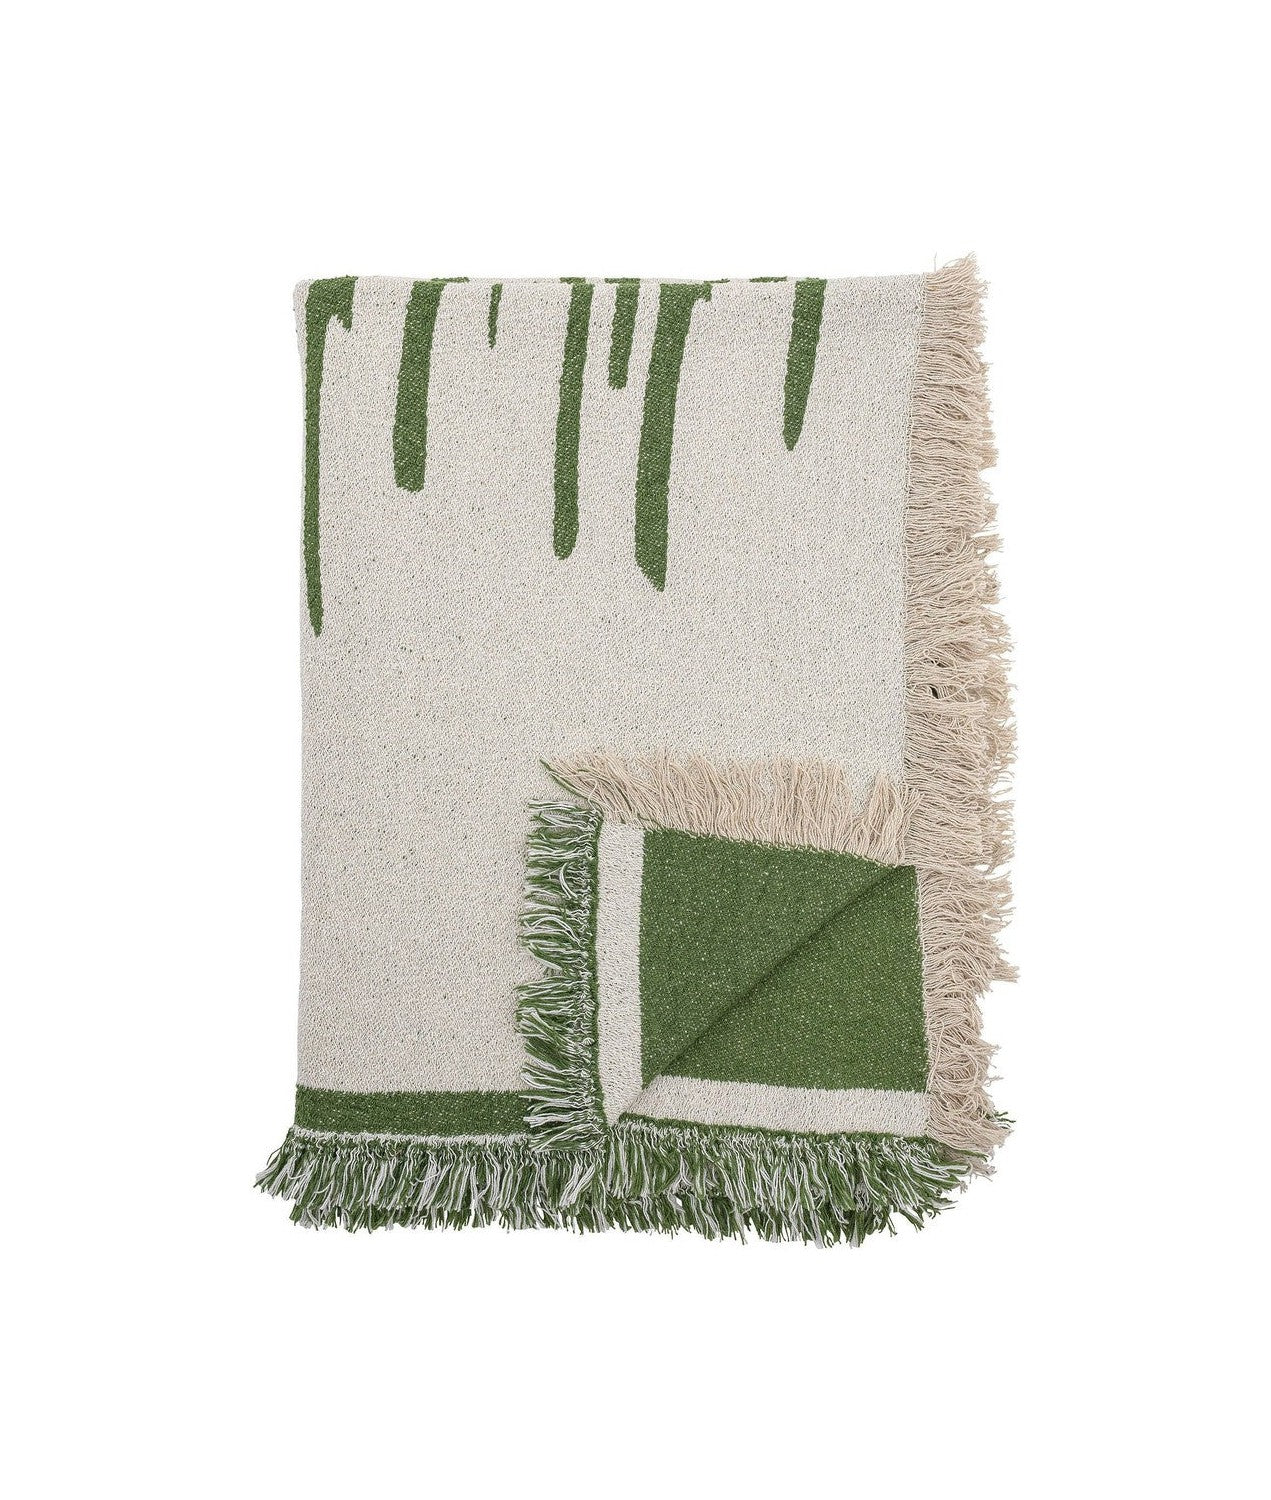 Bloomingville Haxby Throw, Green, Recycled Cotton